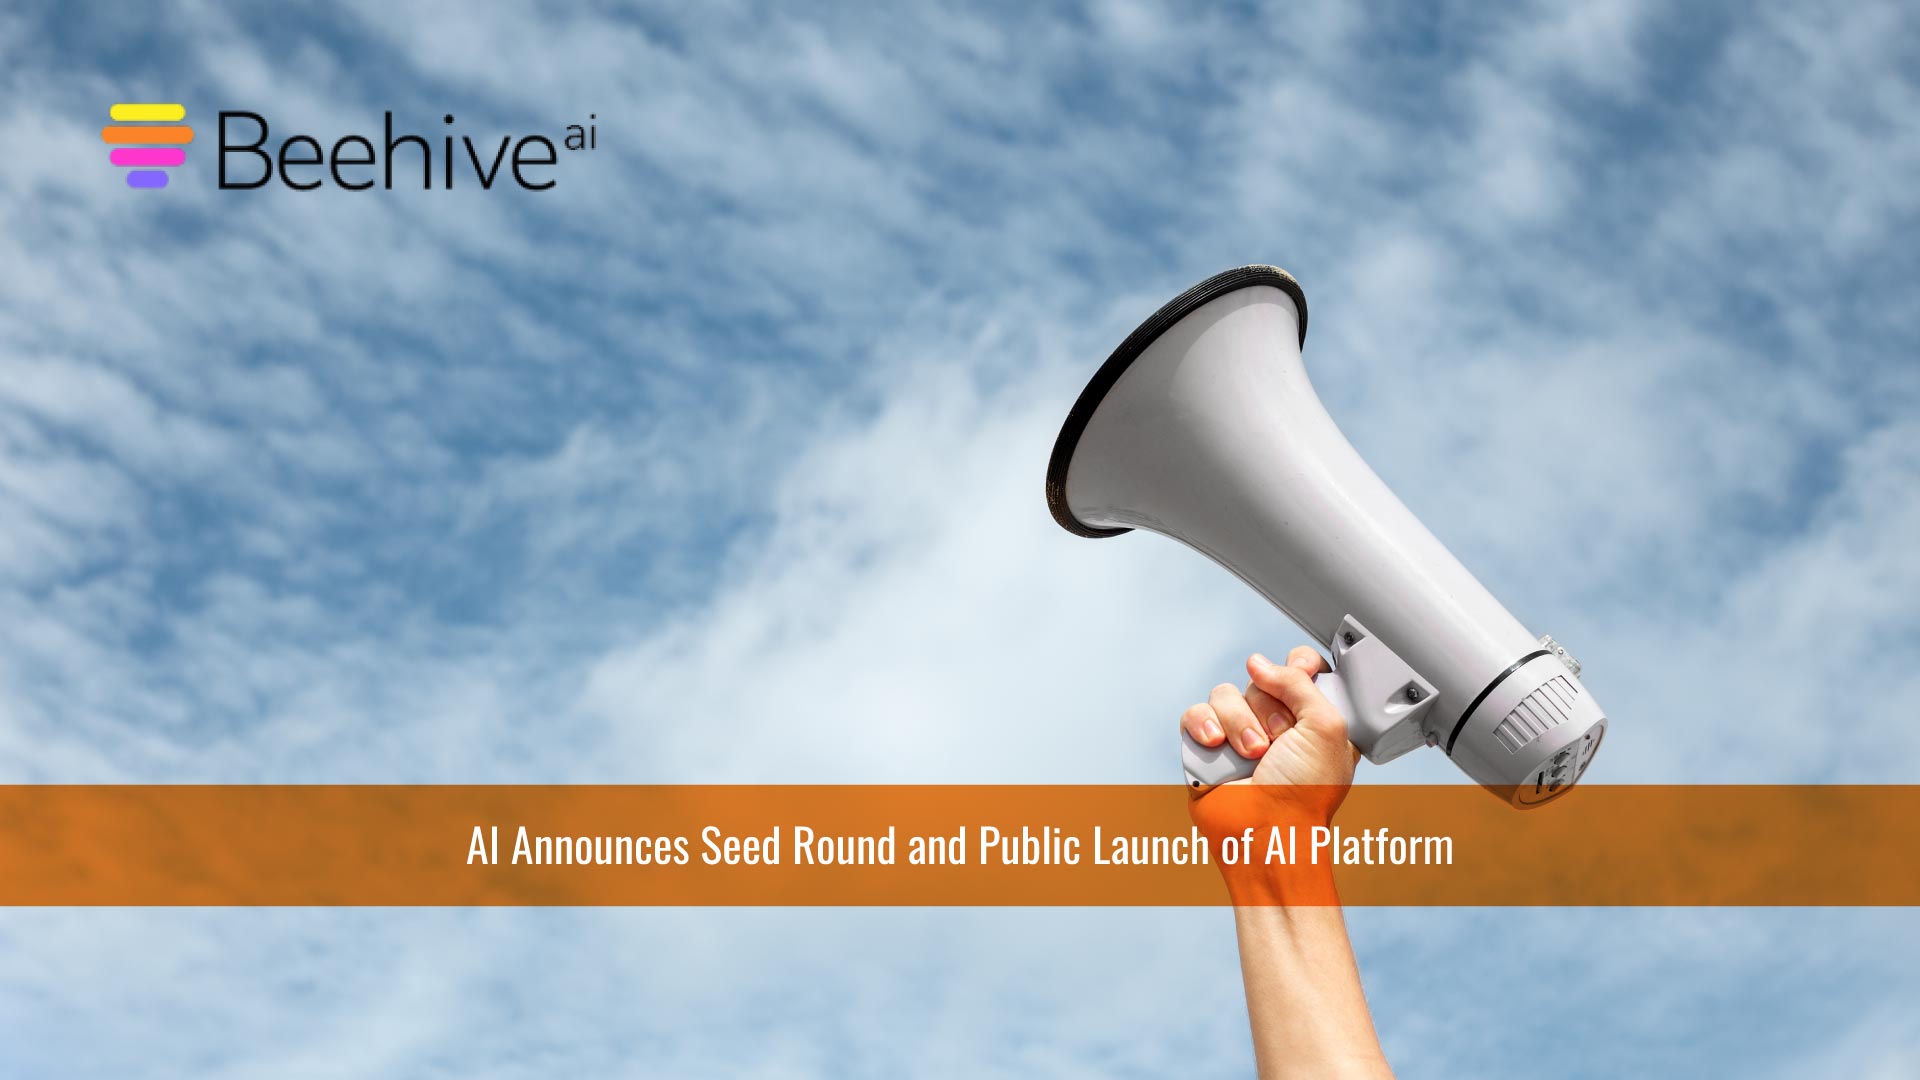 Beehive AI Announces Seed Round and Public Launch of AI Platform Unlocking Global Enterprises' Unstructured Data